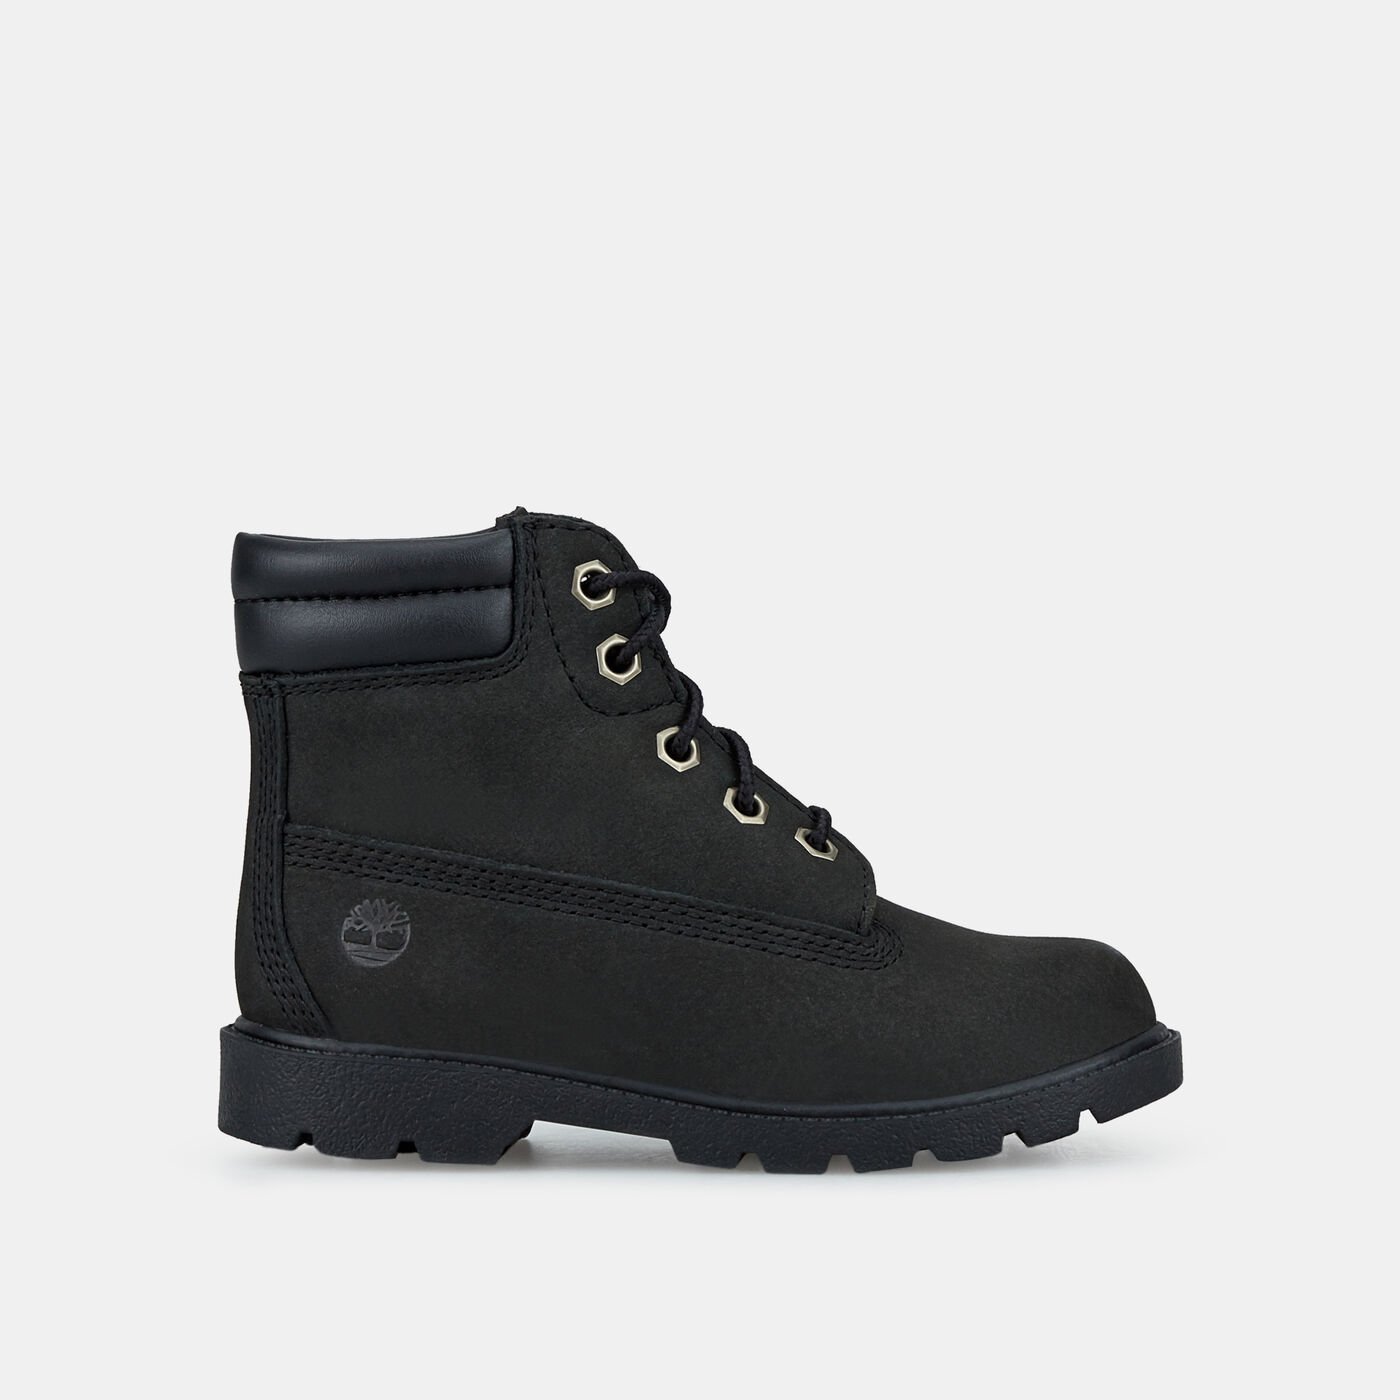 Kids’ 6-Inch Water-Resistant Basic Boot